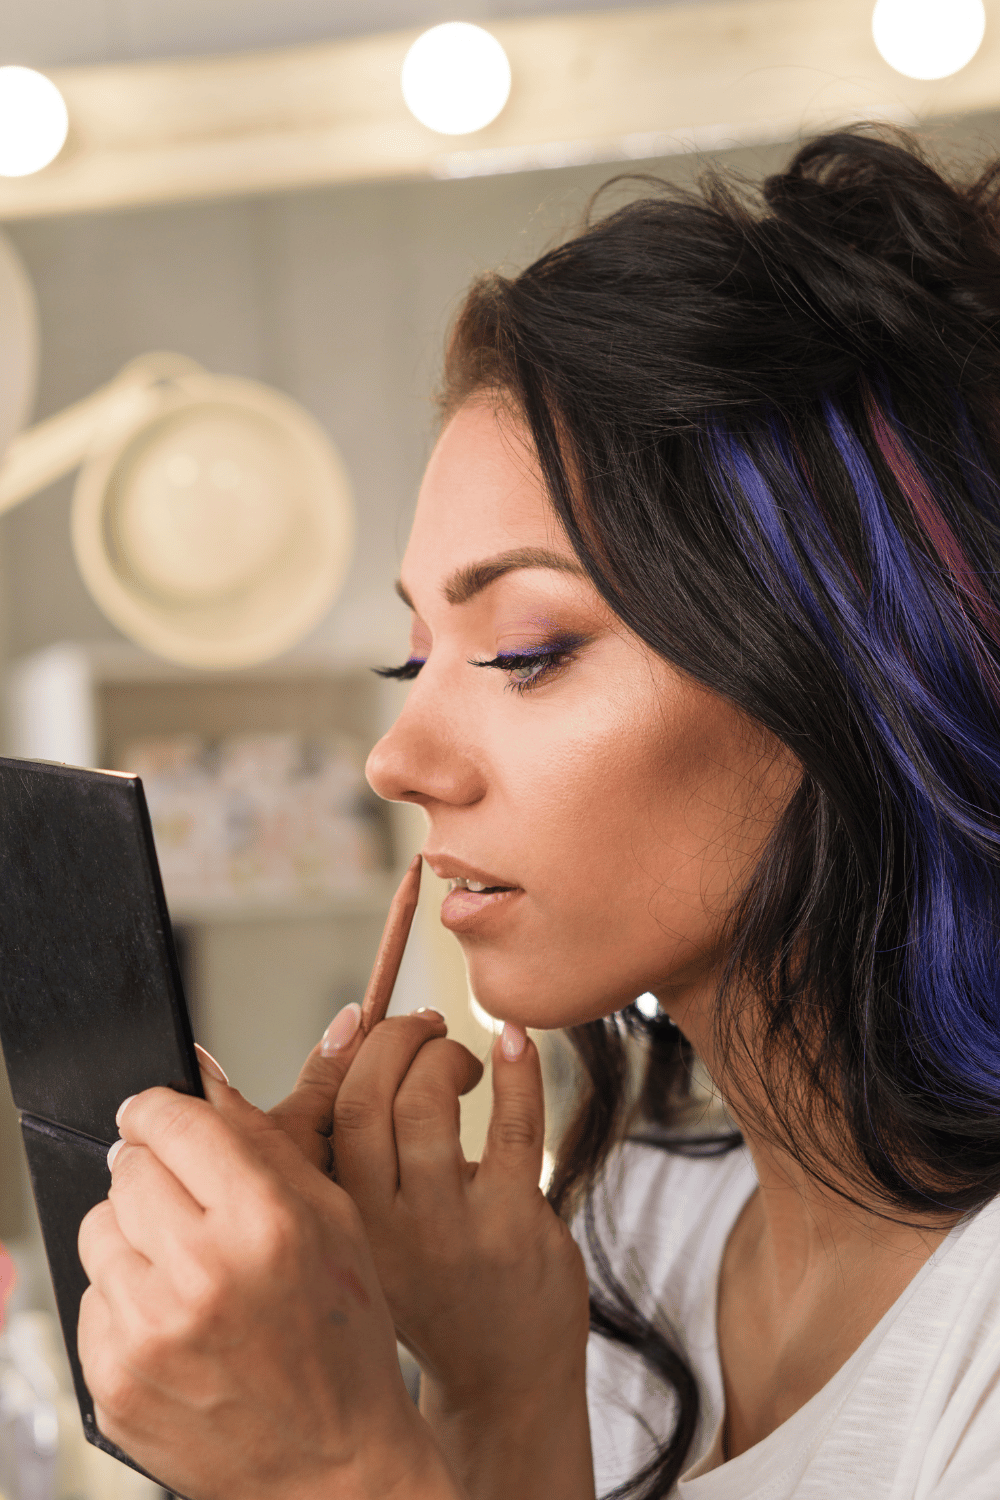 The Rise of Cruelty-Free and Vegan Makeup: Why It Matters